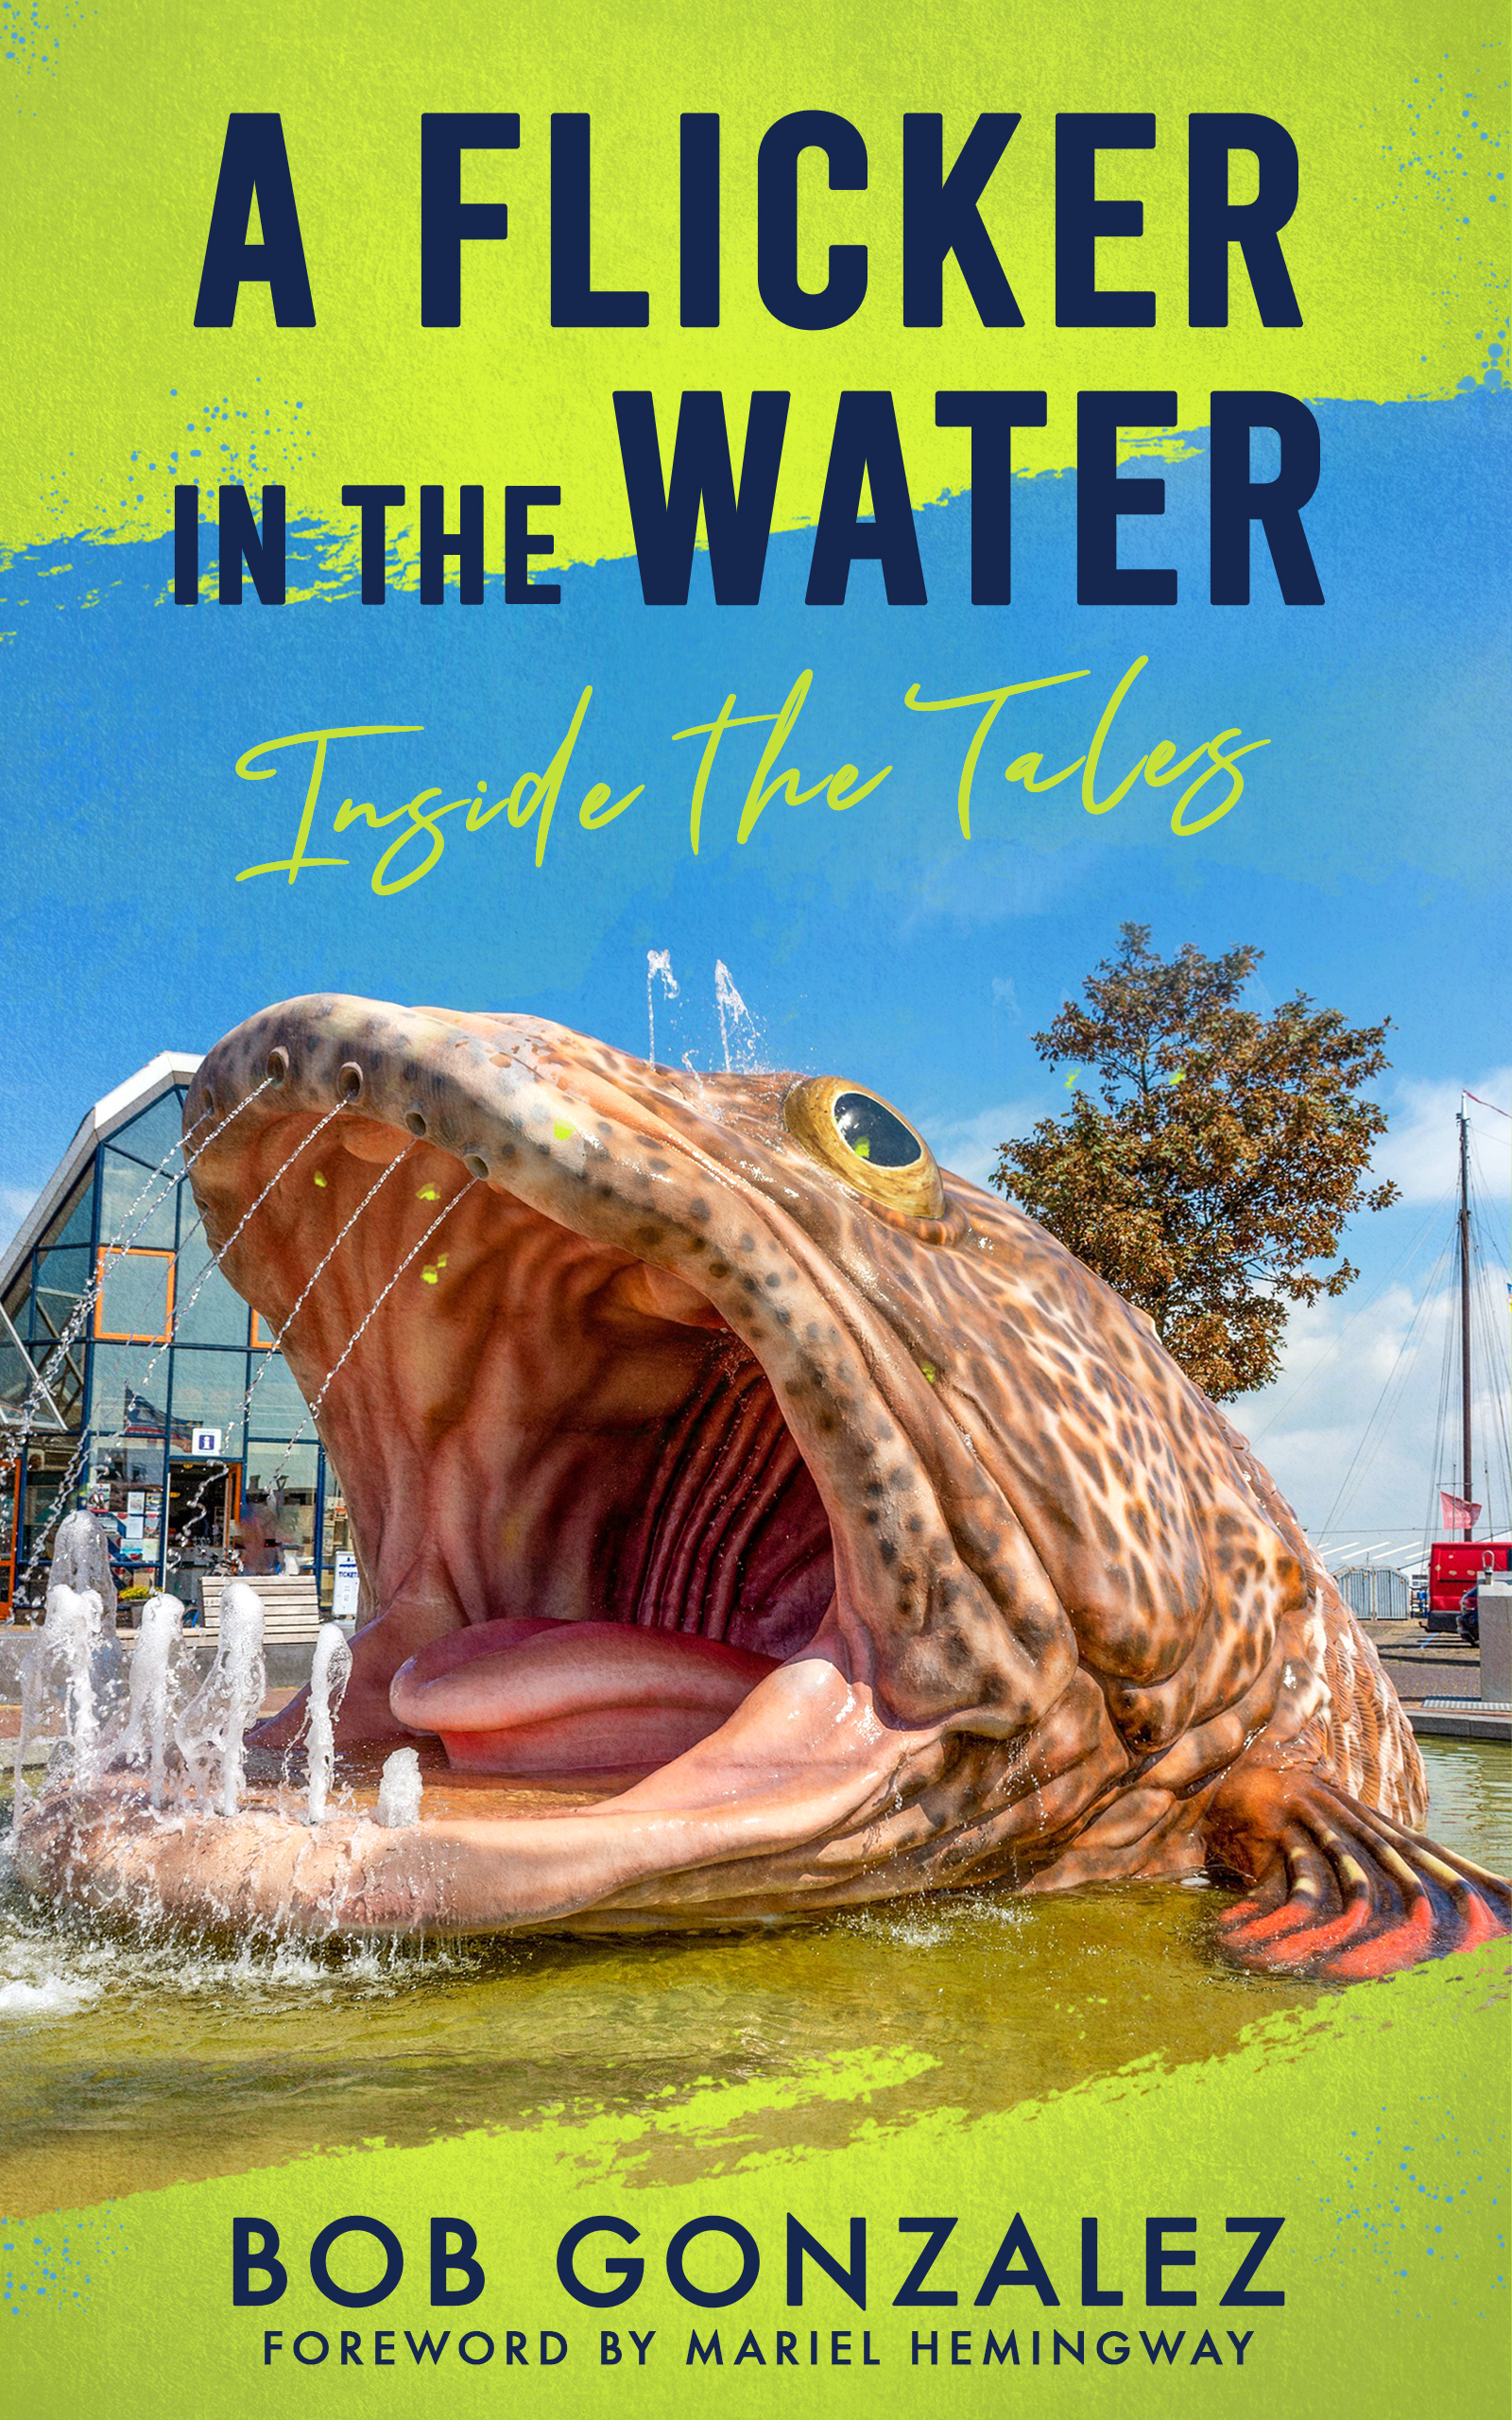 The front cover of A Flicker in the Water: Inside the Tales by Bob Gonzalez